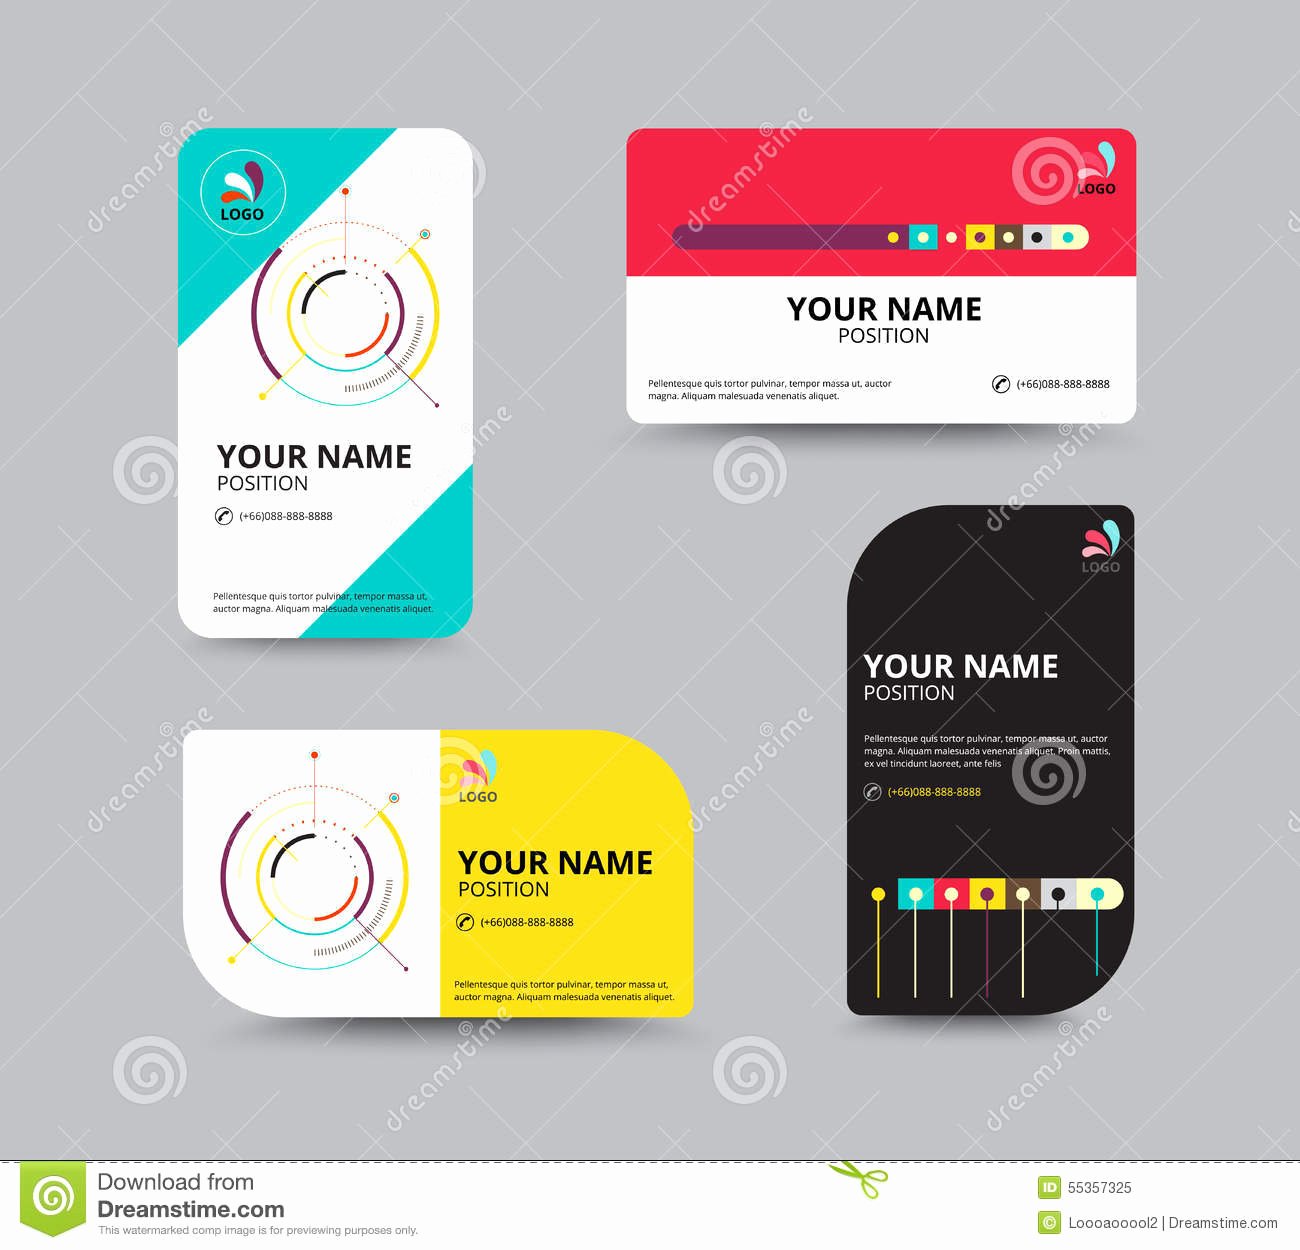 Business Card Layout Template Best Of Business Card Template Business Card Layout Design